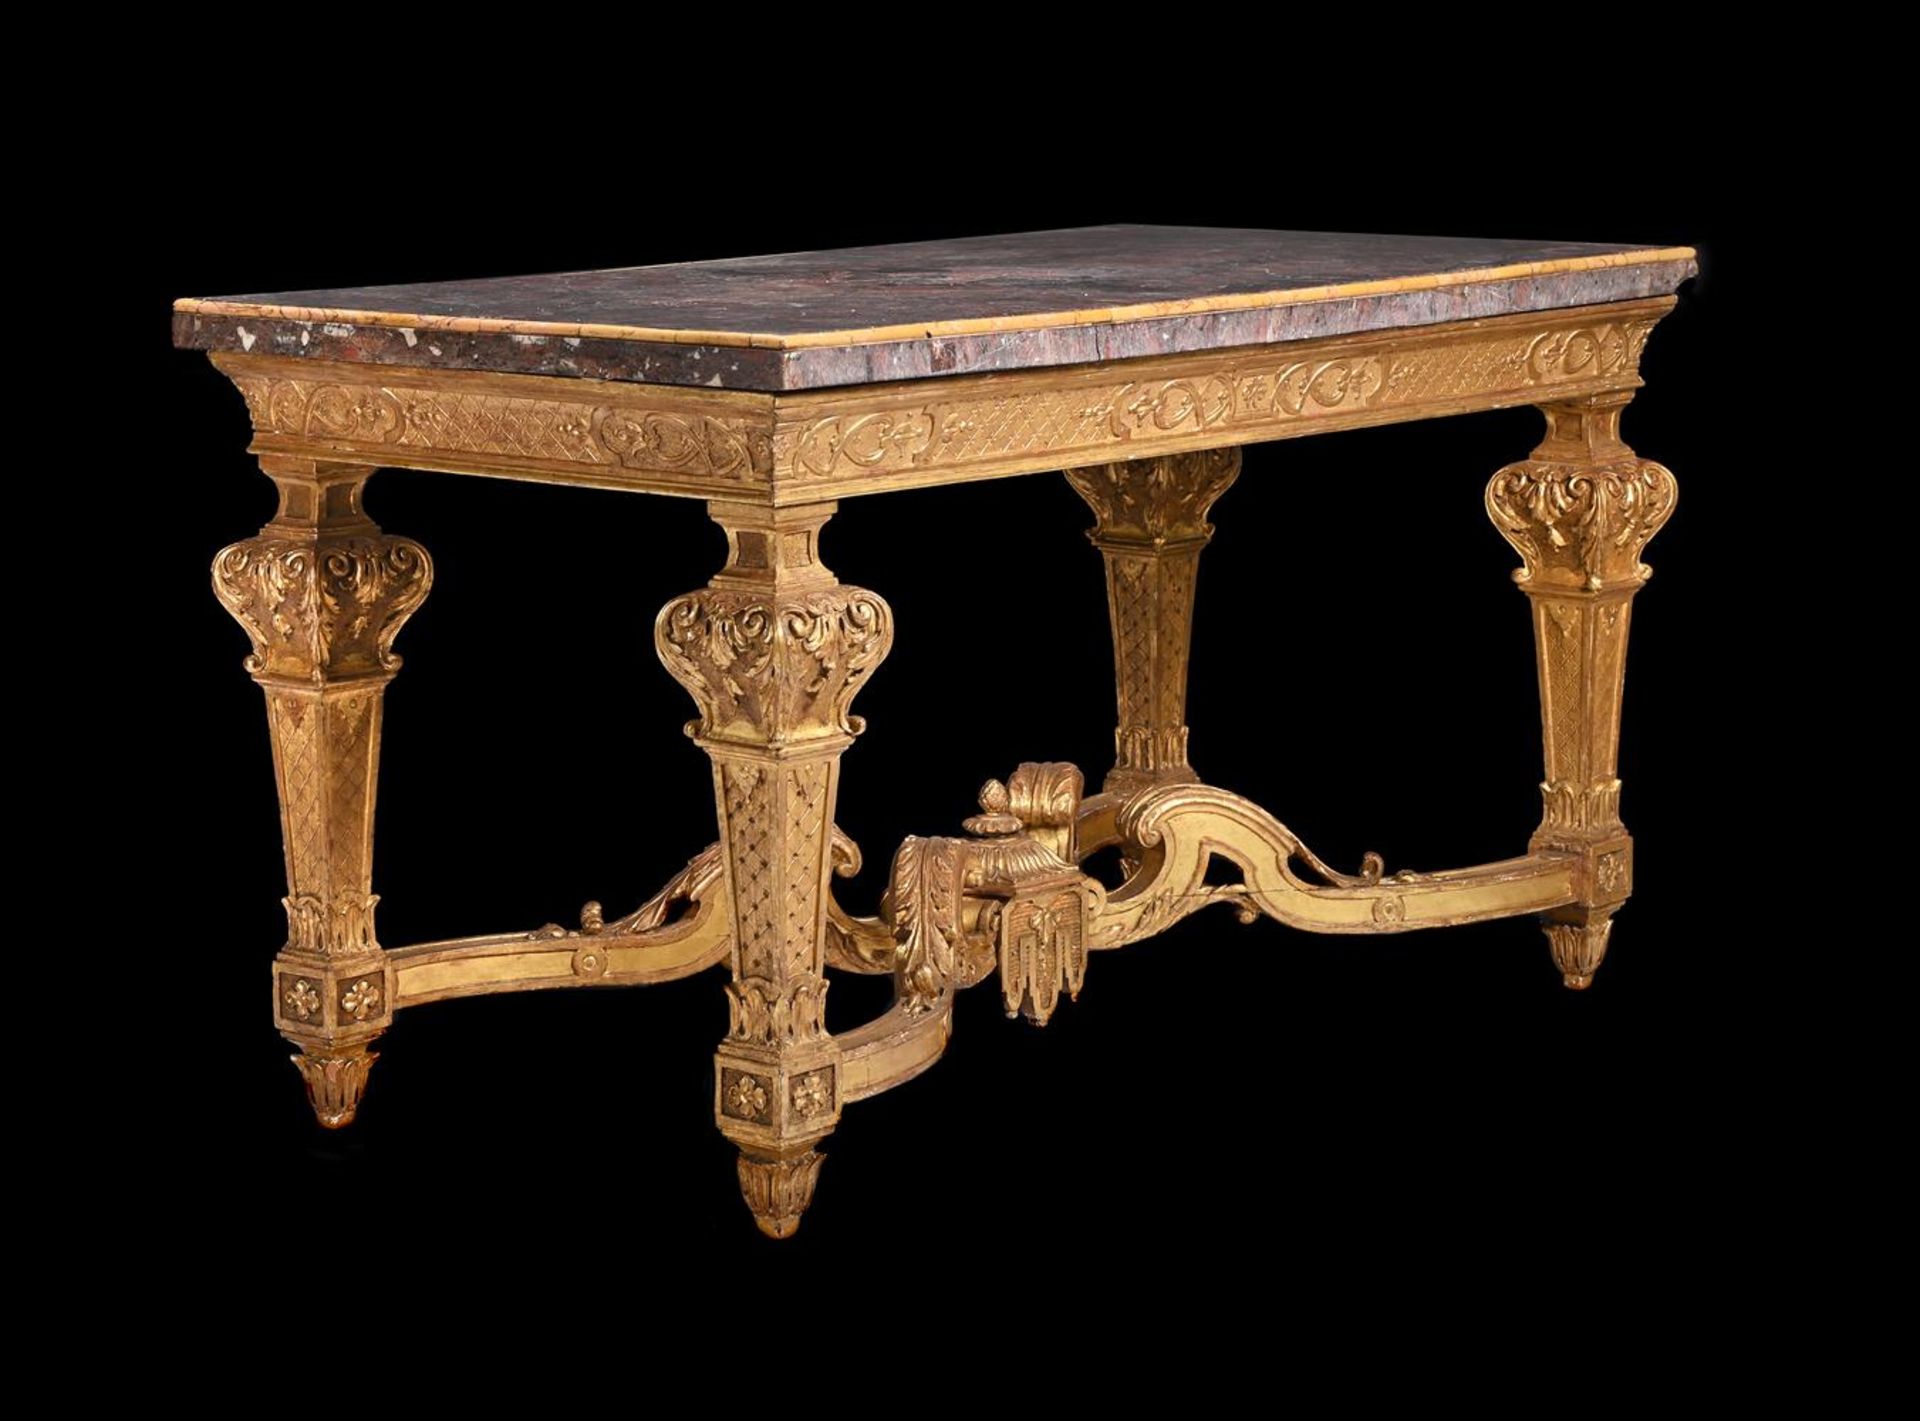 A CARVED AND GILT GESSO CENTRE TABLE IN LOUIS XIV STYLE, 19TH CENTURY